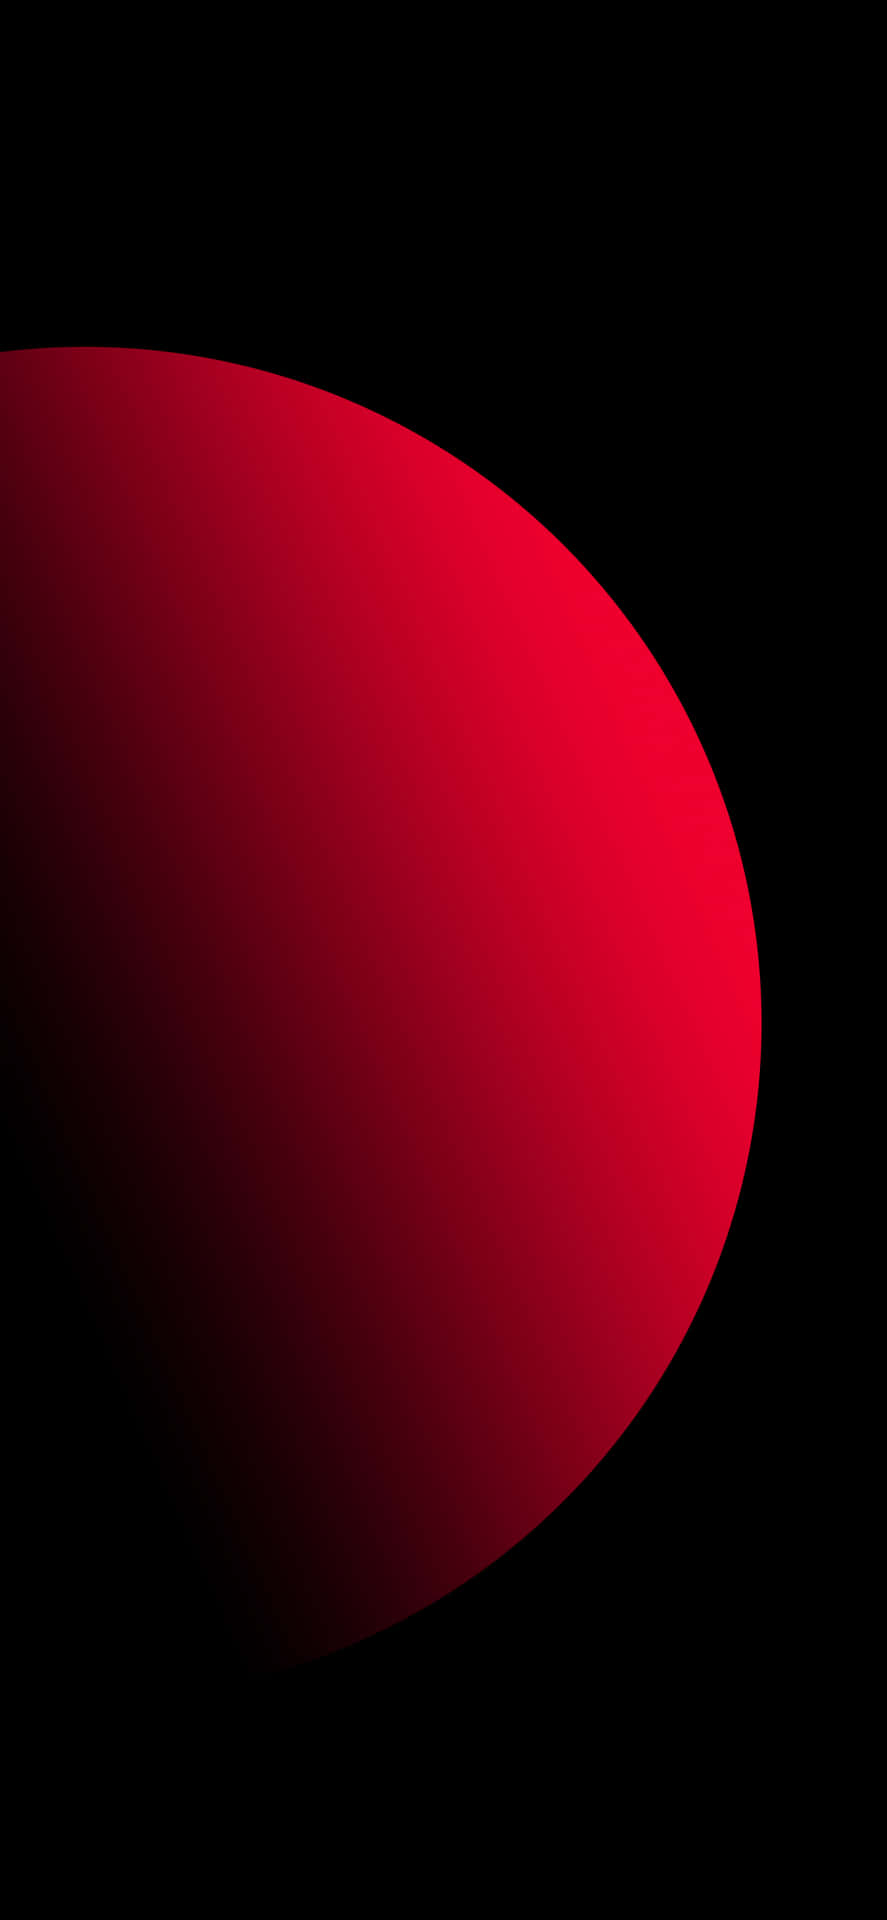 A Red Circle On A Black Background Wallpaper